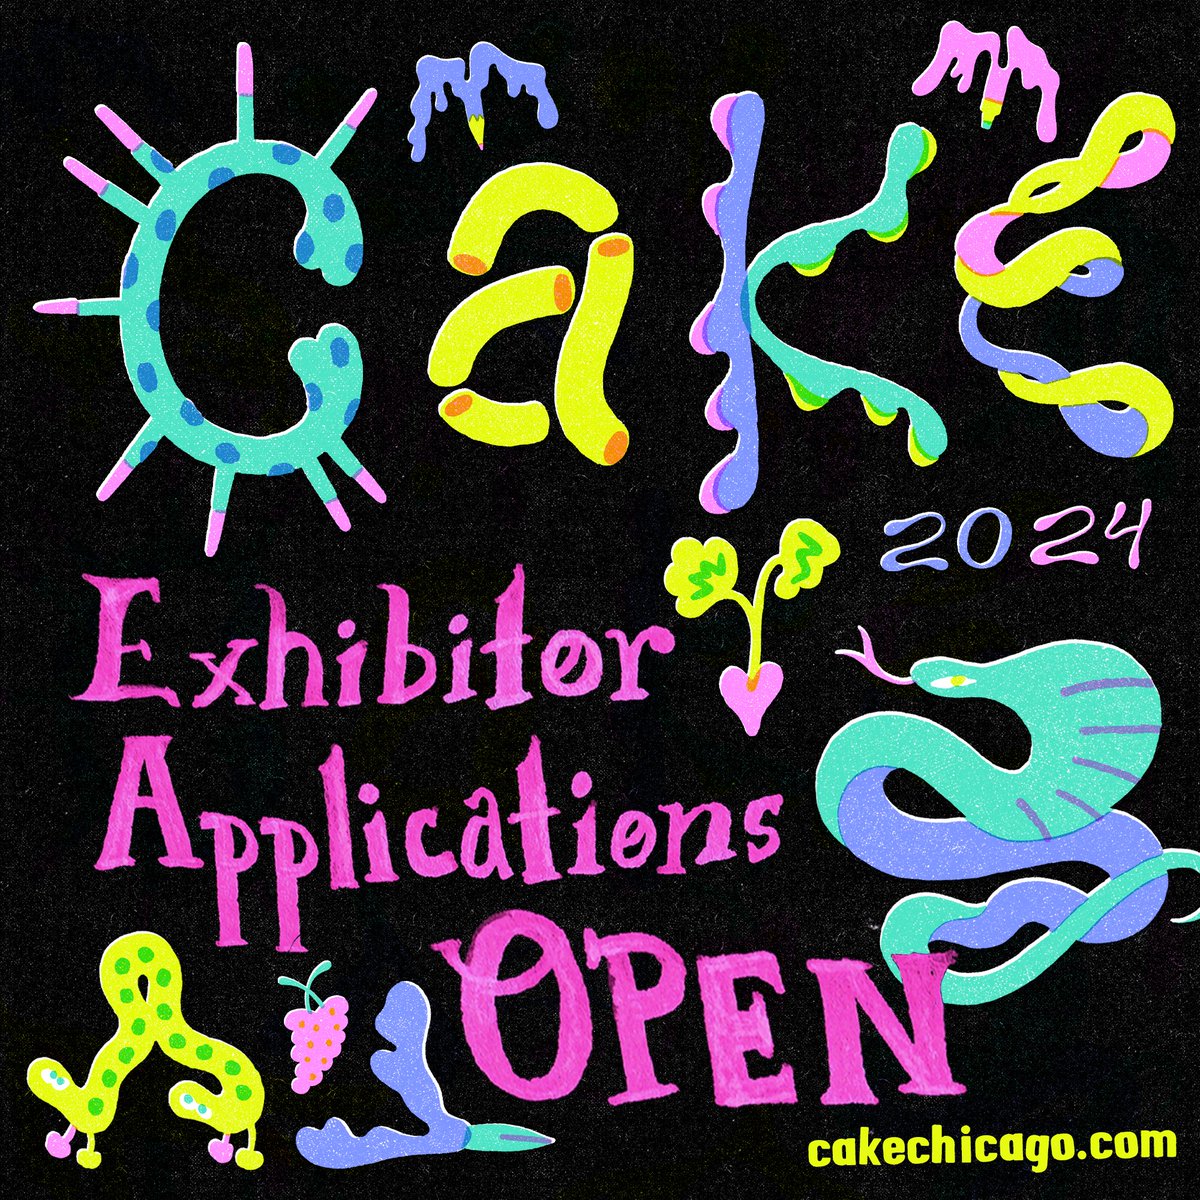 Chicago Alternative Comics Expo 2024 is Exhibitor Applications are OPEN - TODAY through APRIL 20th. CAKE is a curated show & our organizers aim to highlight both established & emerging alternative cartoonists! 🍰APPLY HERE: docs.google.com/forms/d/e/1FAI…